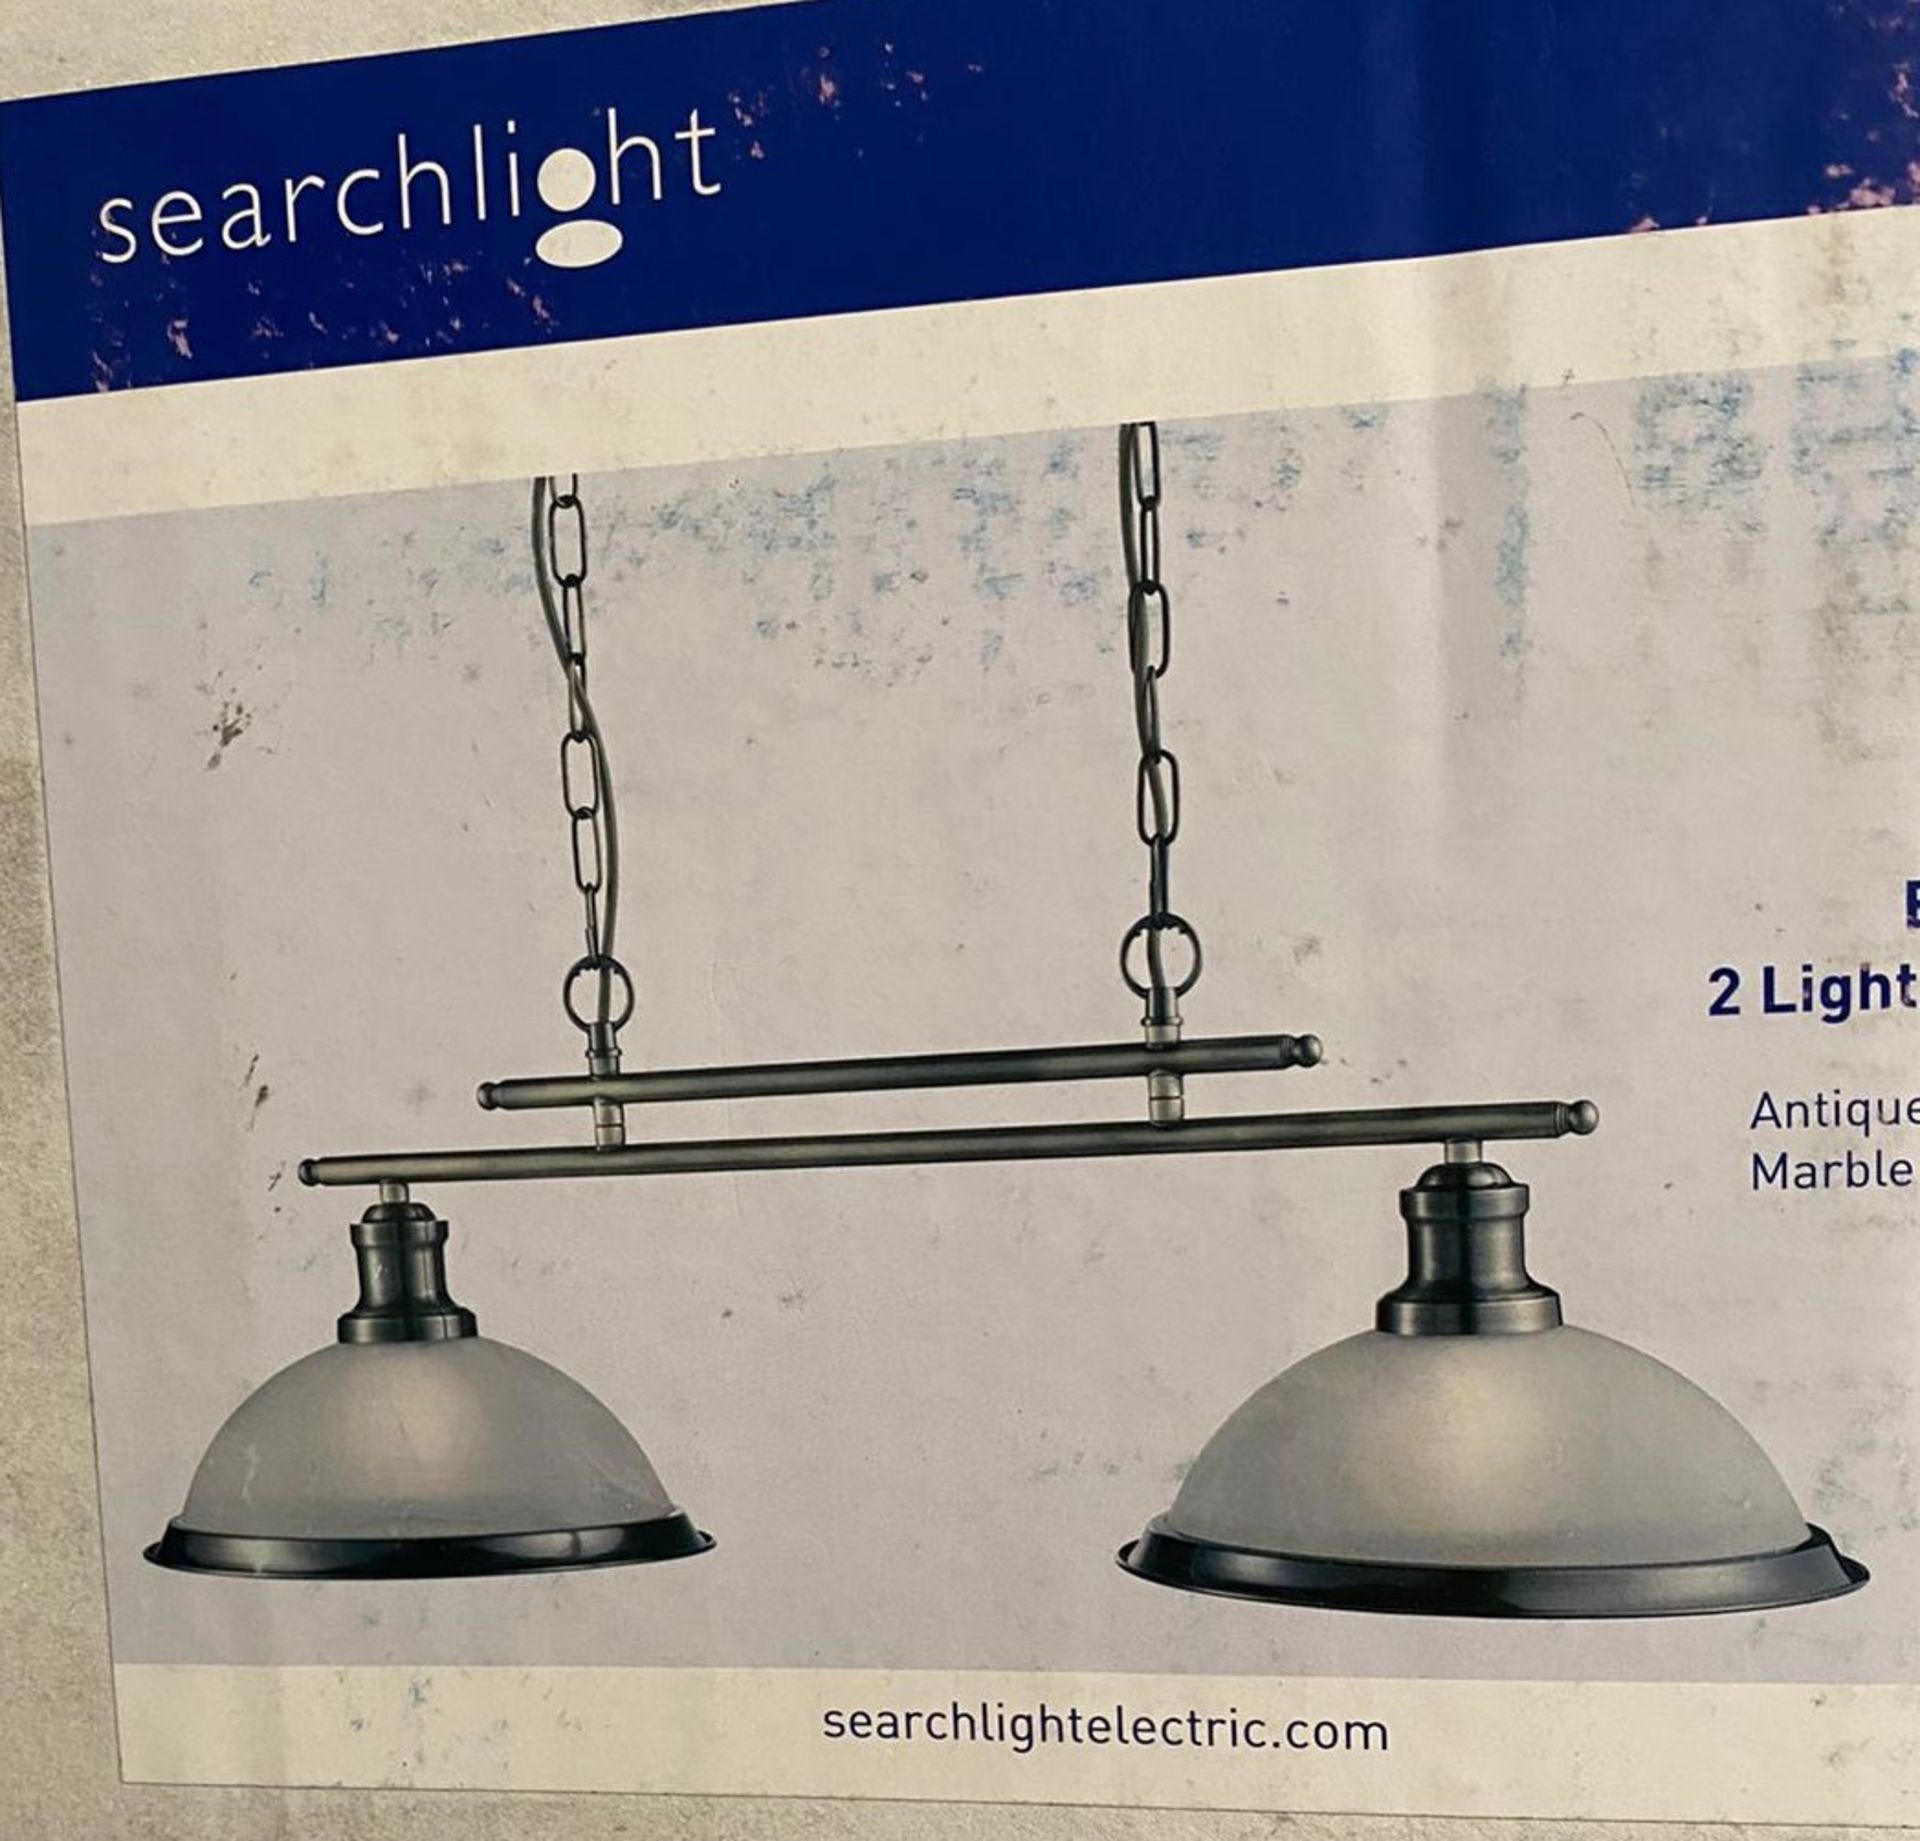 1 x Searchlight Bistro 2 Light Ceiling Bar in Antique Brass - Ref: 2682-2AB - New Boxed - RRP: £115 - Image 3 of 3